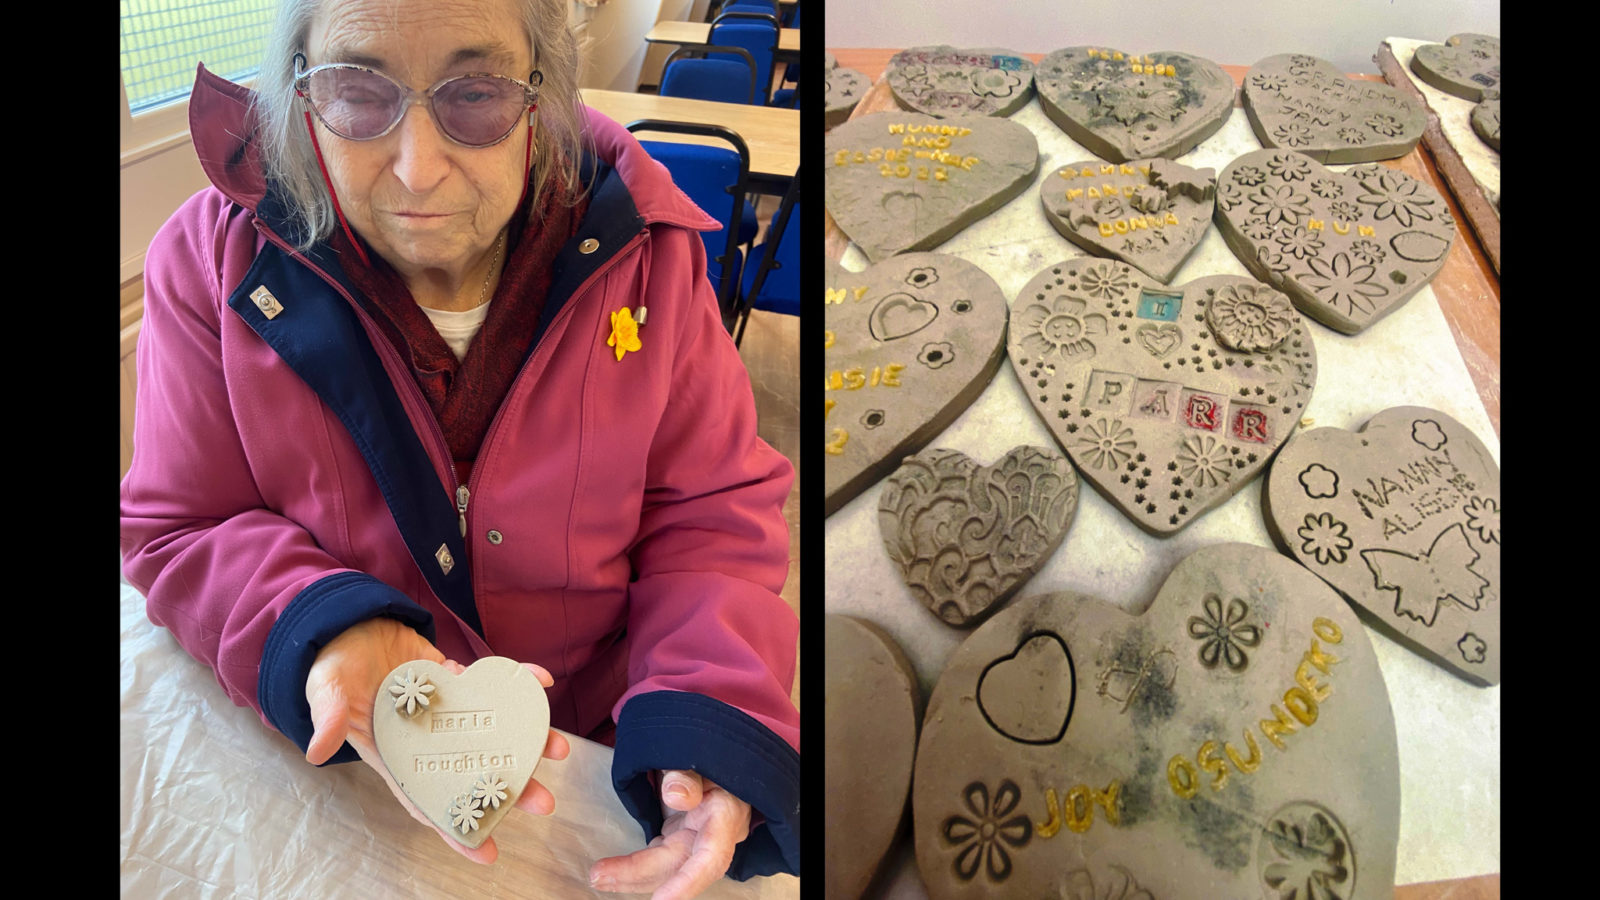 On the left, an elderly lady shows her clay heart to the camera, on the right is a table with unfired clay hearts on it.